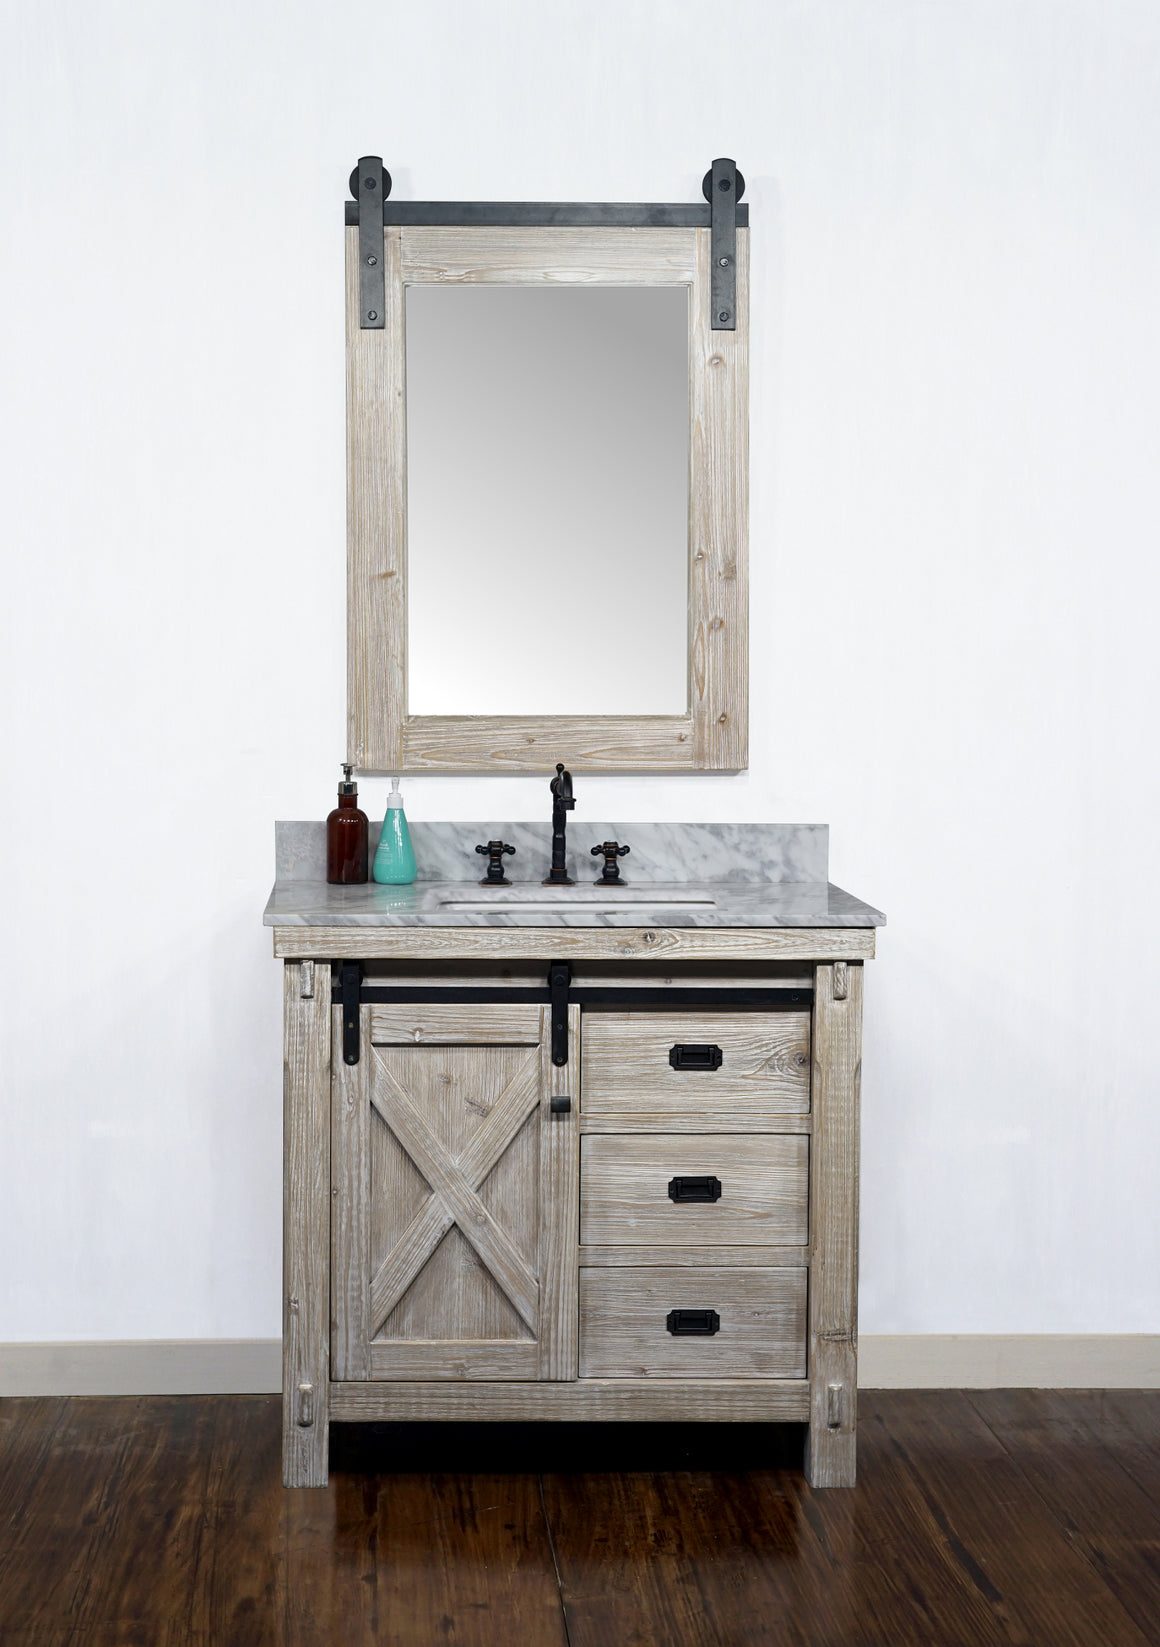 36"RUSTIC SOLID FIR BARN DOOR STYLE SINGLE SINK VANITY WITH CARRARA WHITE MARBLE TOP WITH RECTANGULAR SINK-NO FAUCET